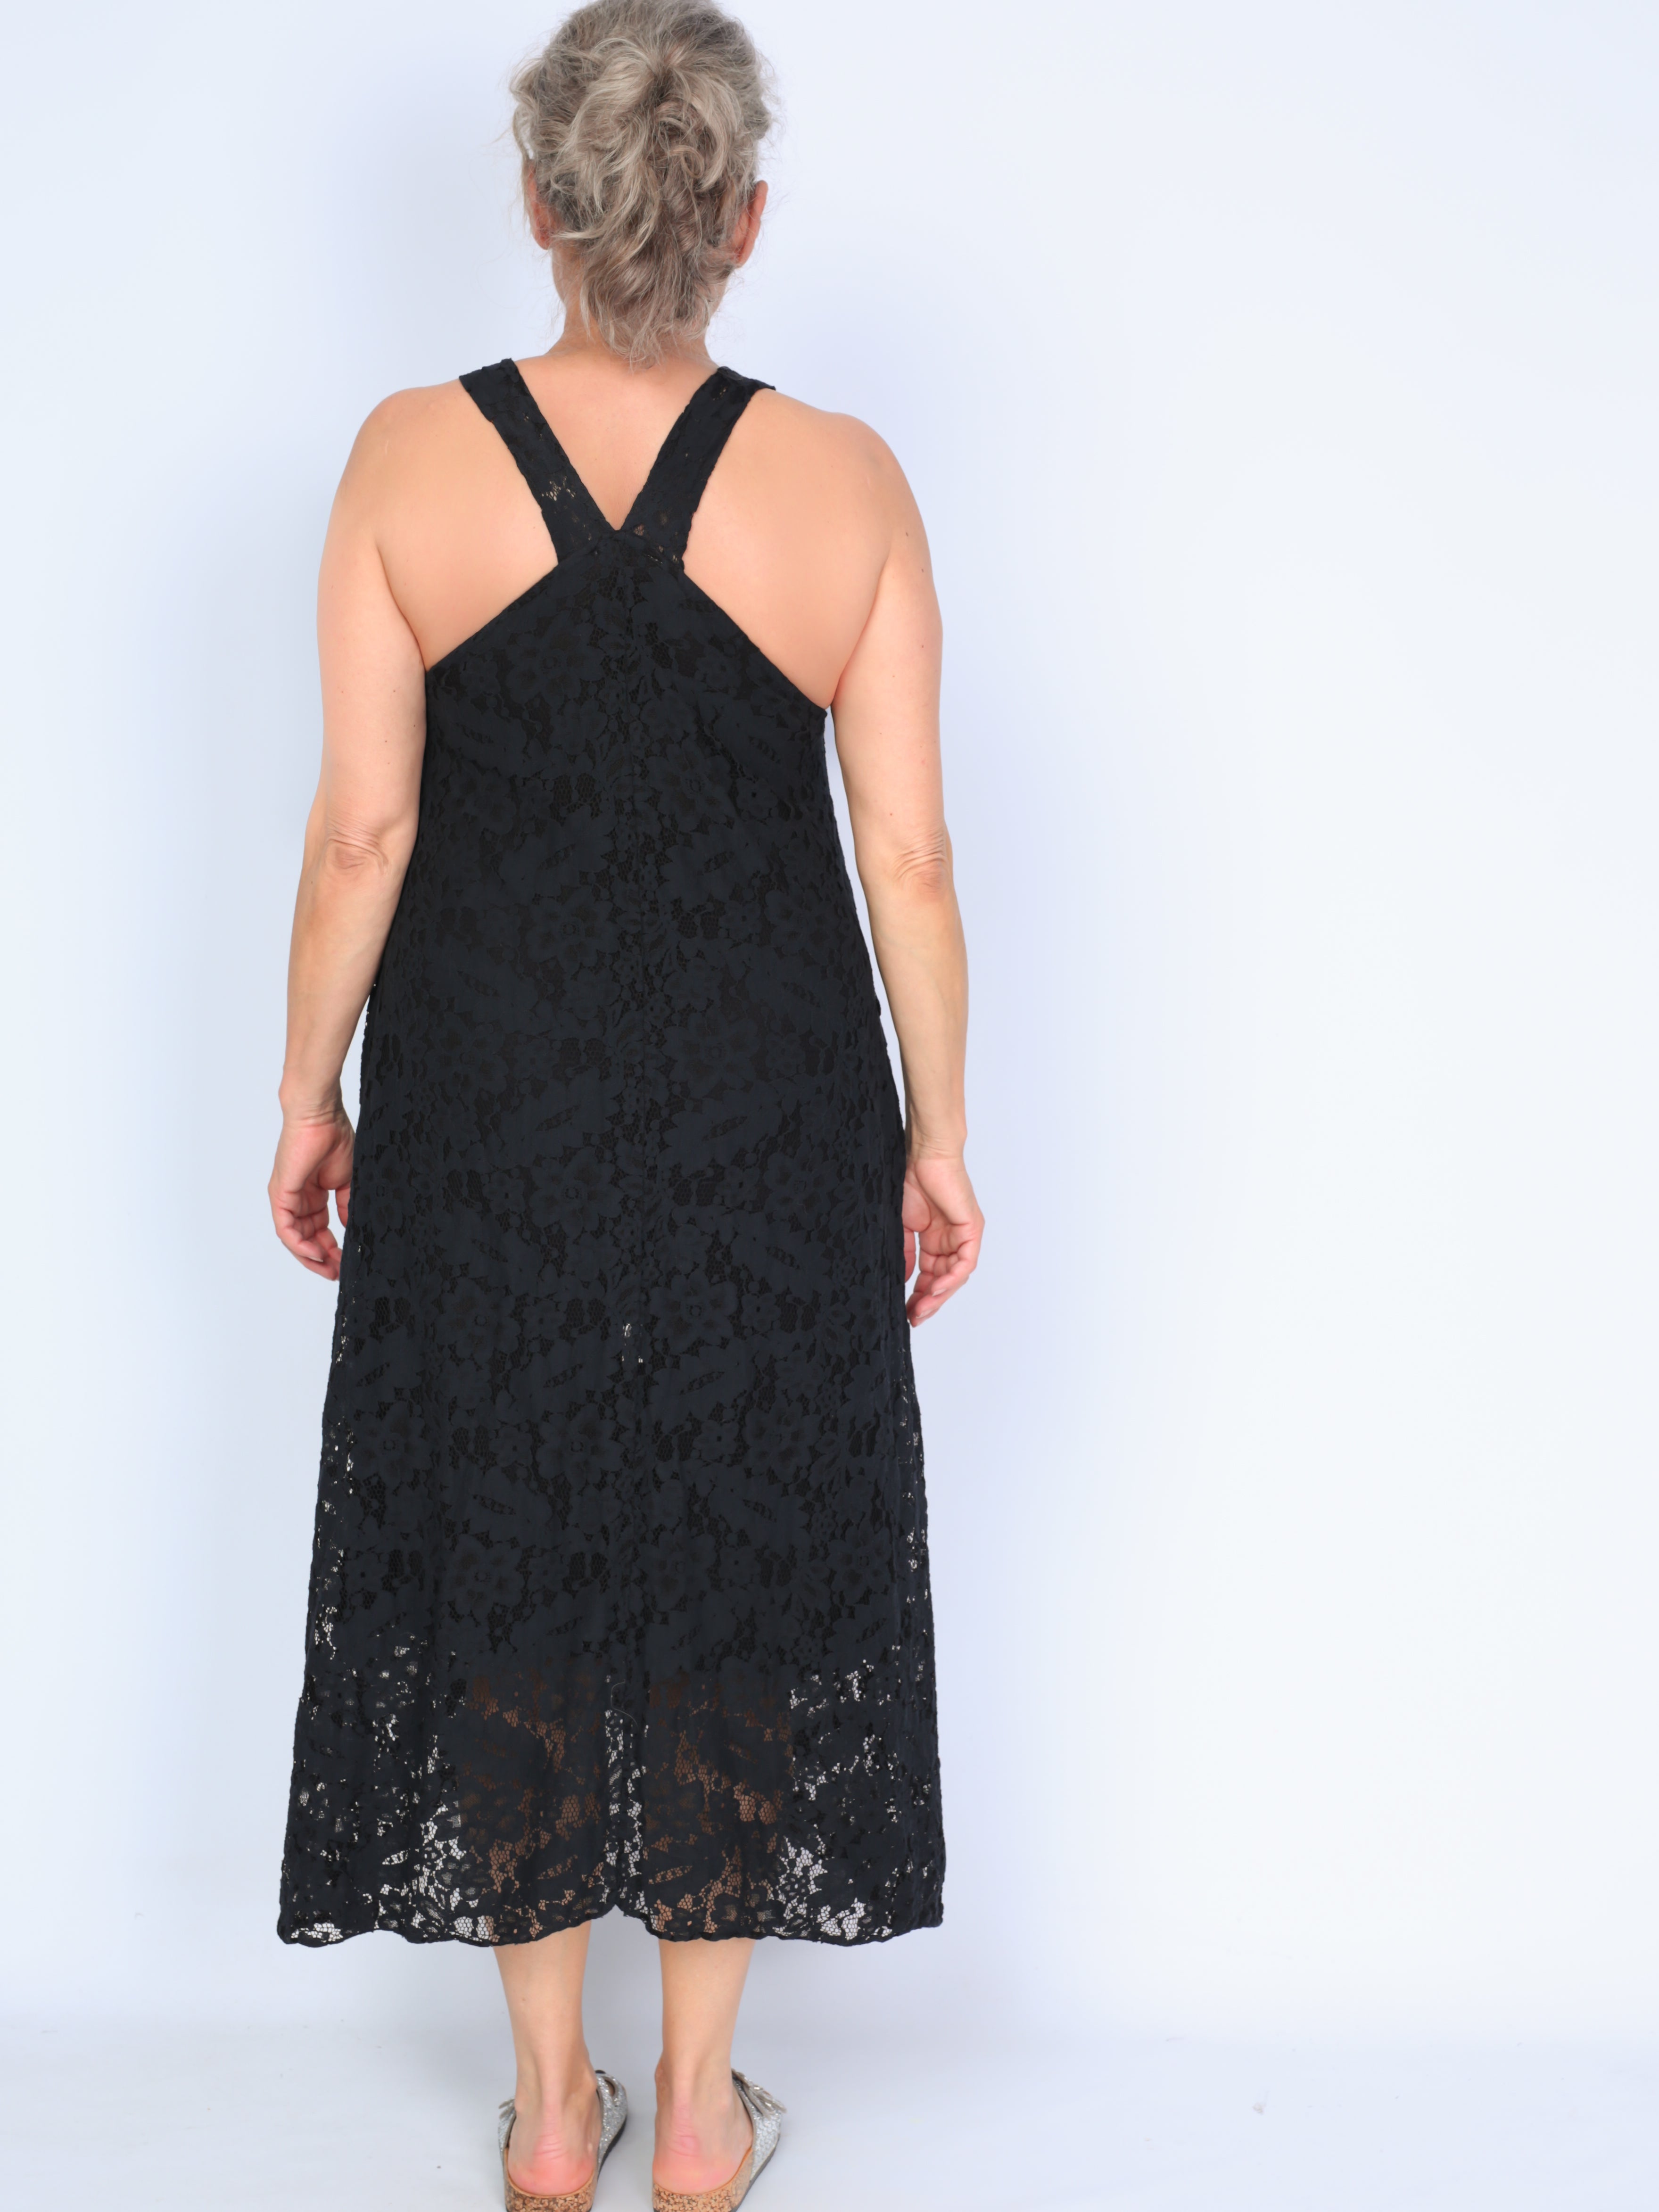 Lace dress with racer back